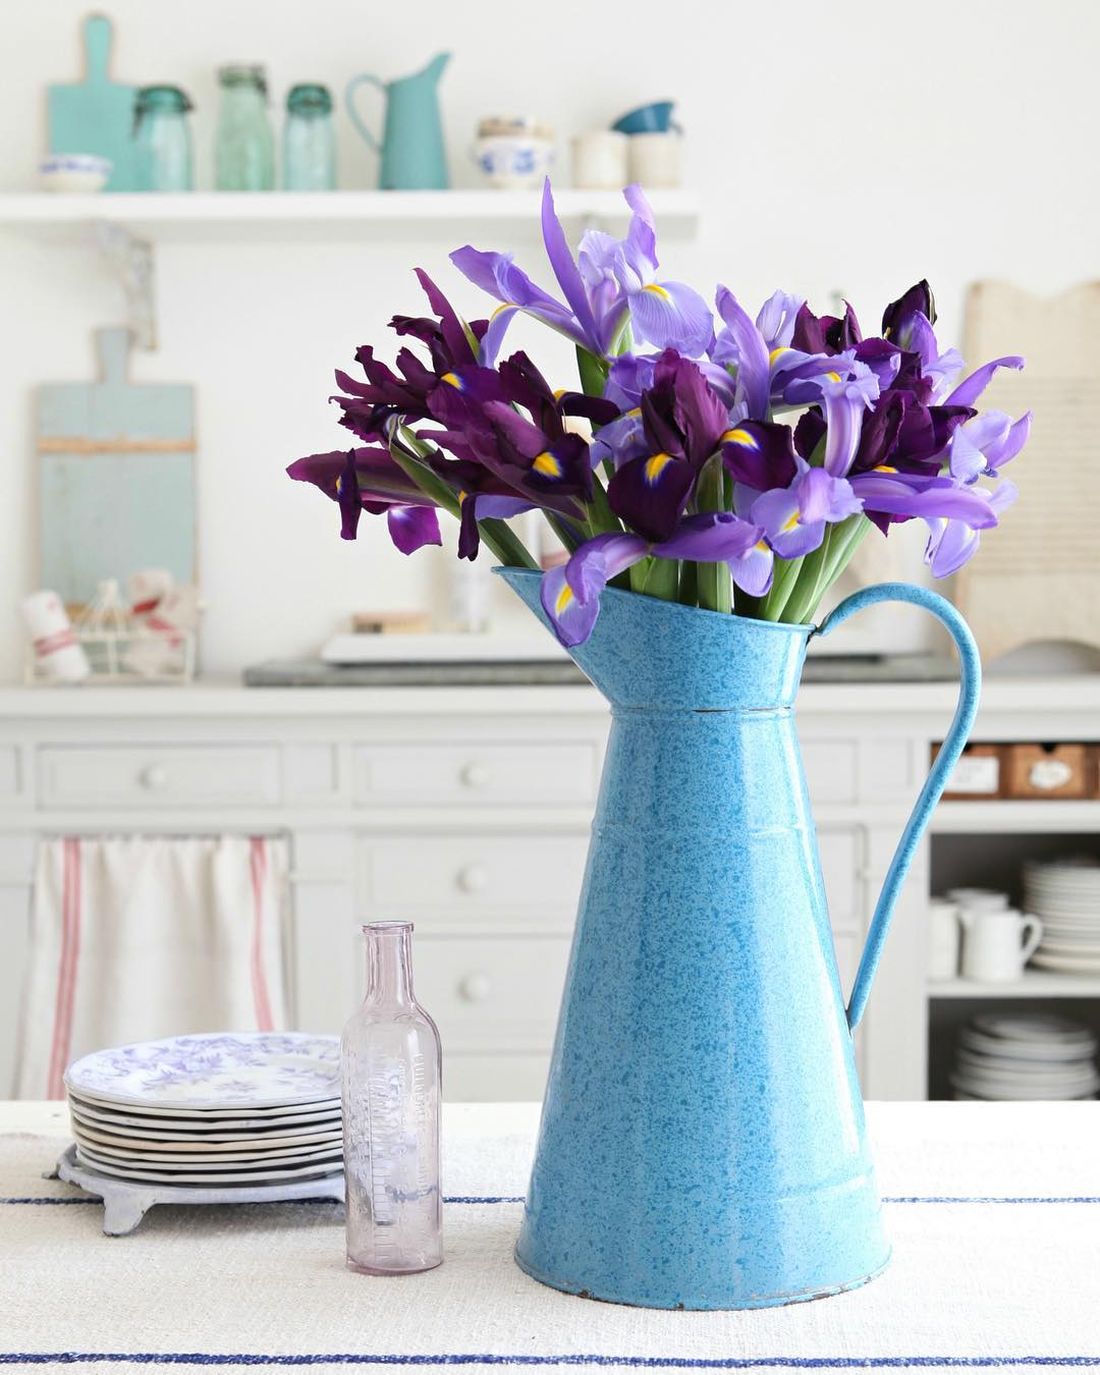 French Country Kitchen with Blue Pitcher and Flowers via @frenchlarkspur